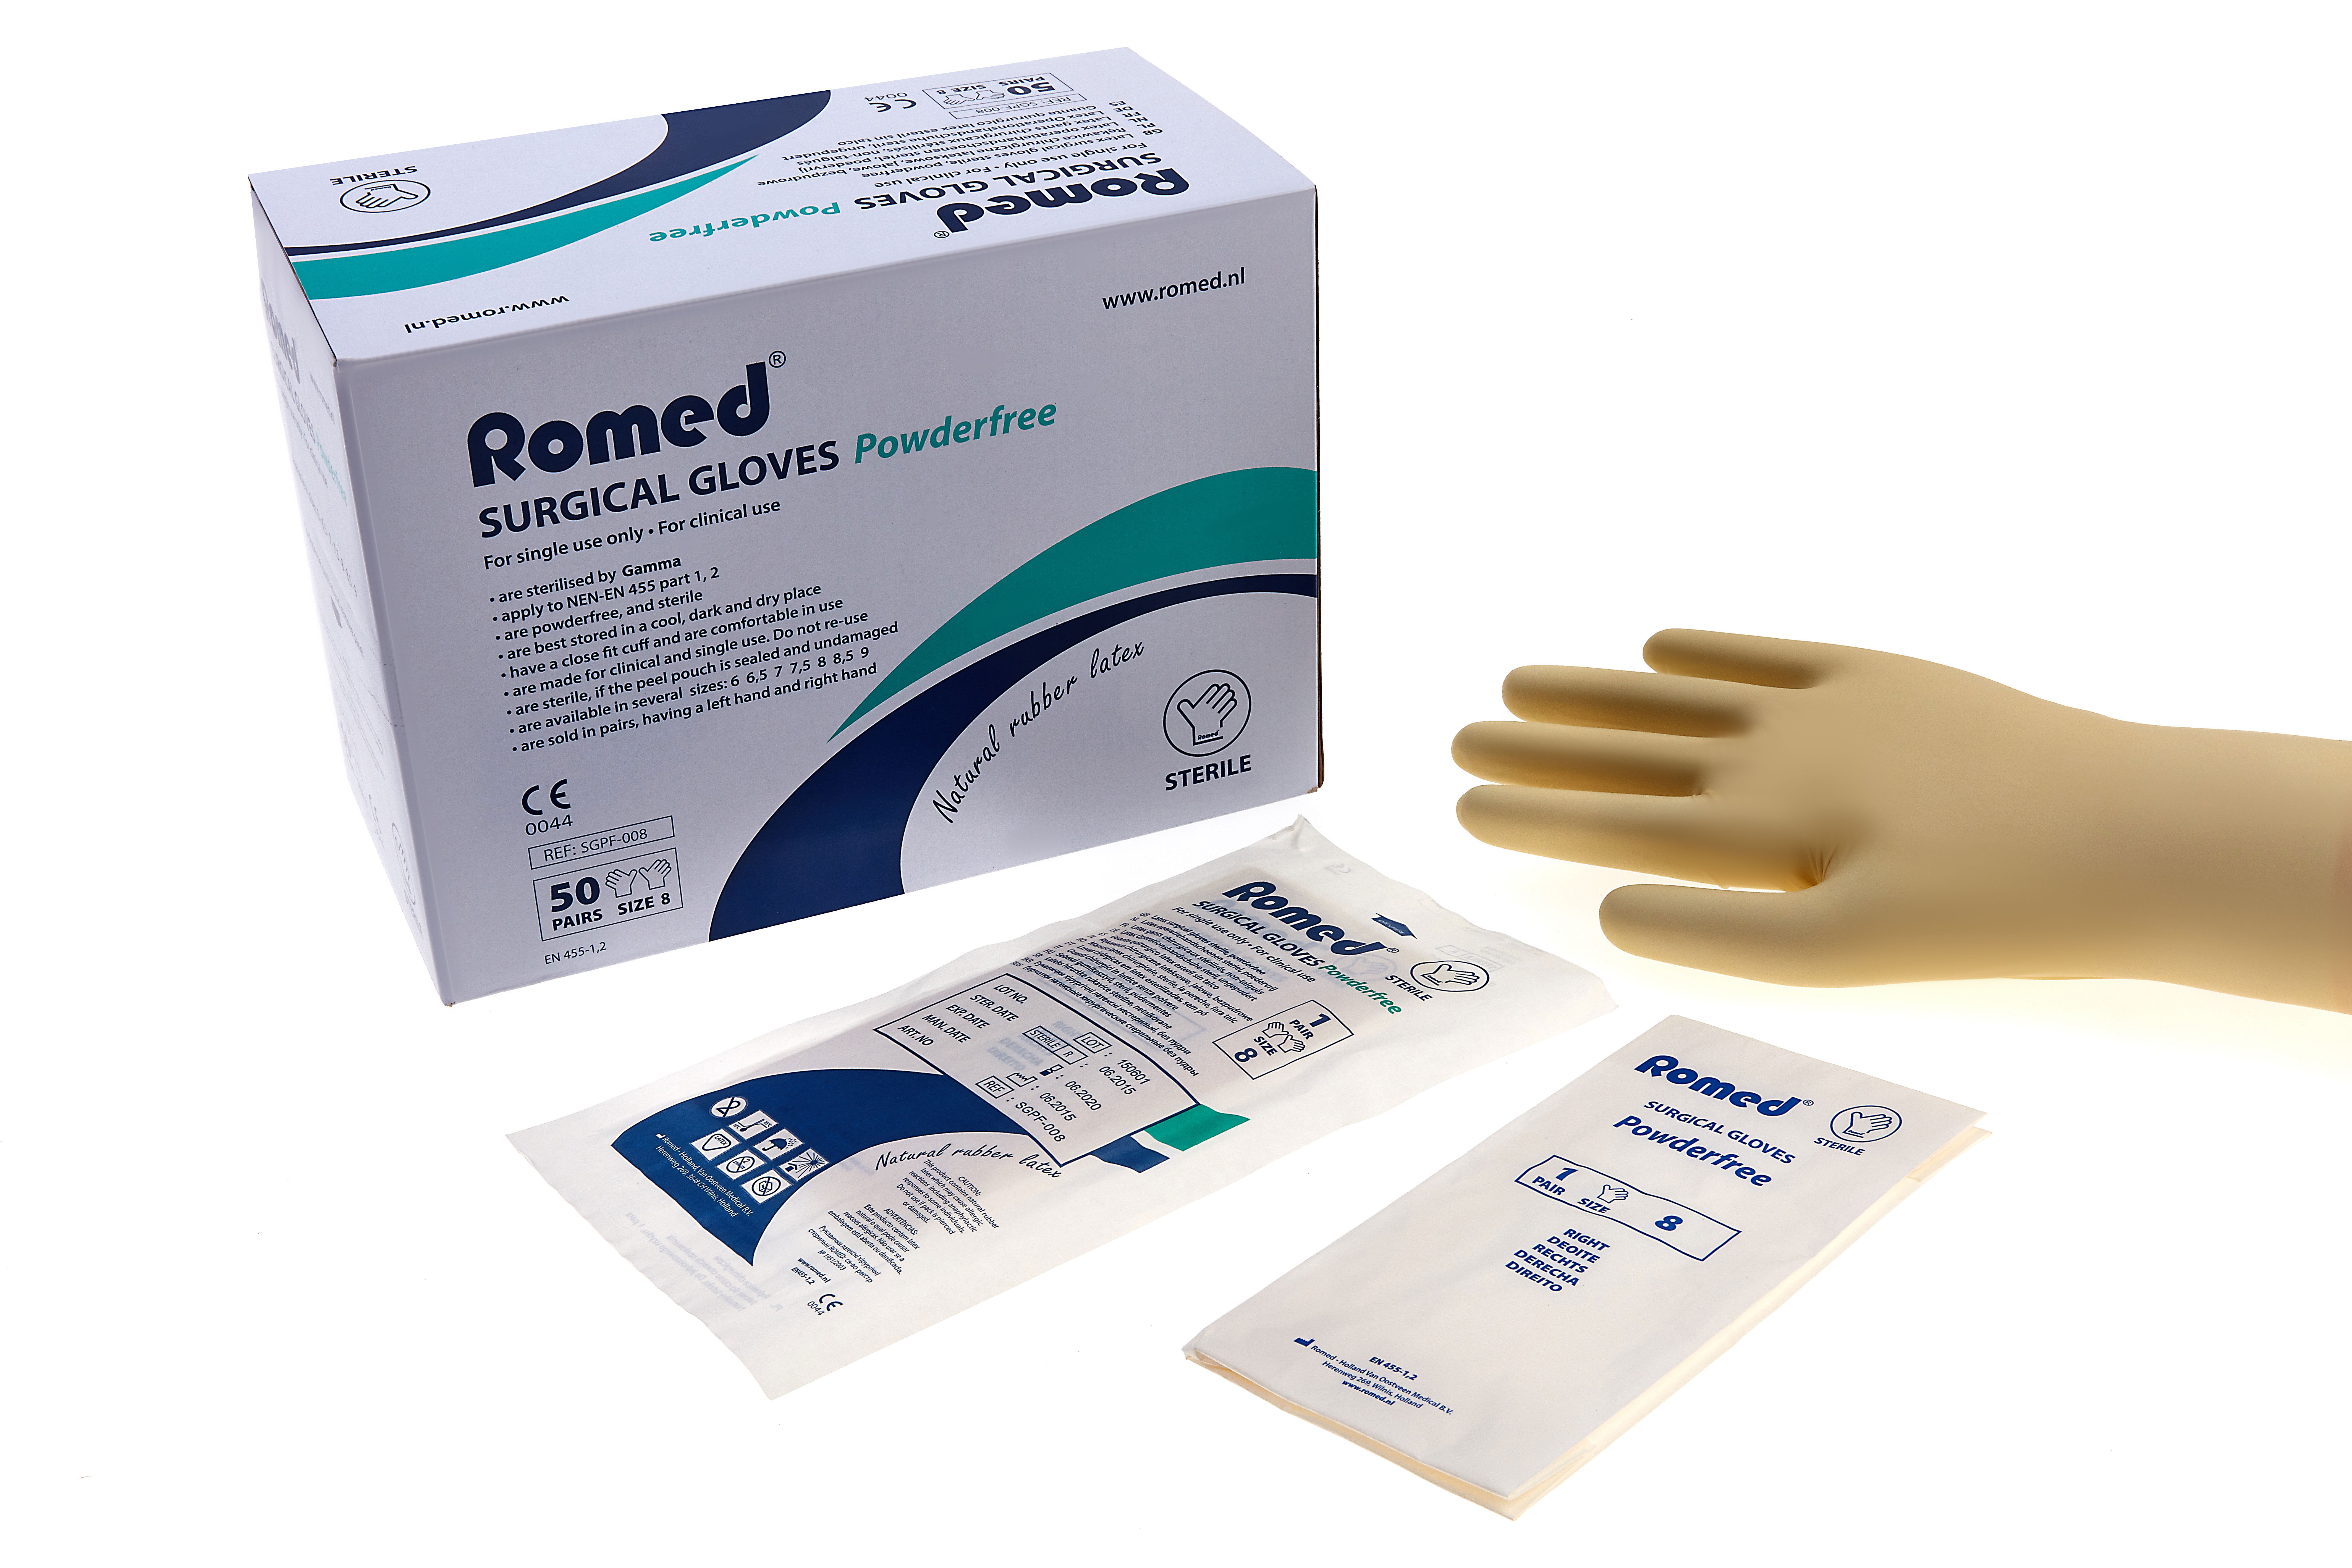 SGPF-065 Romed latex surgical gloves, powderfree, size 6.5, sterile per pair, 50 pairs in an inner box, 5 x 50 pairs = 250 pairs in a carton.